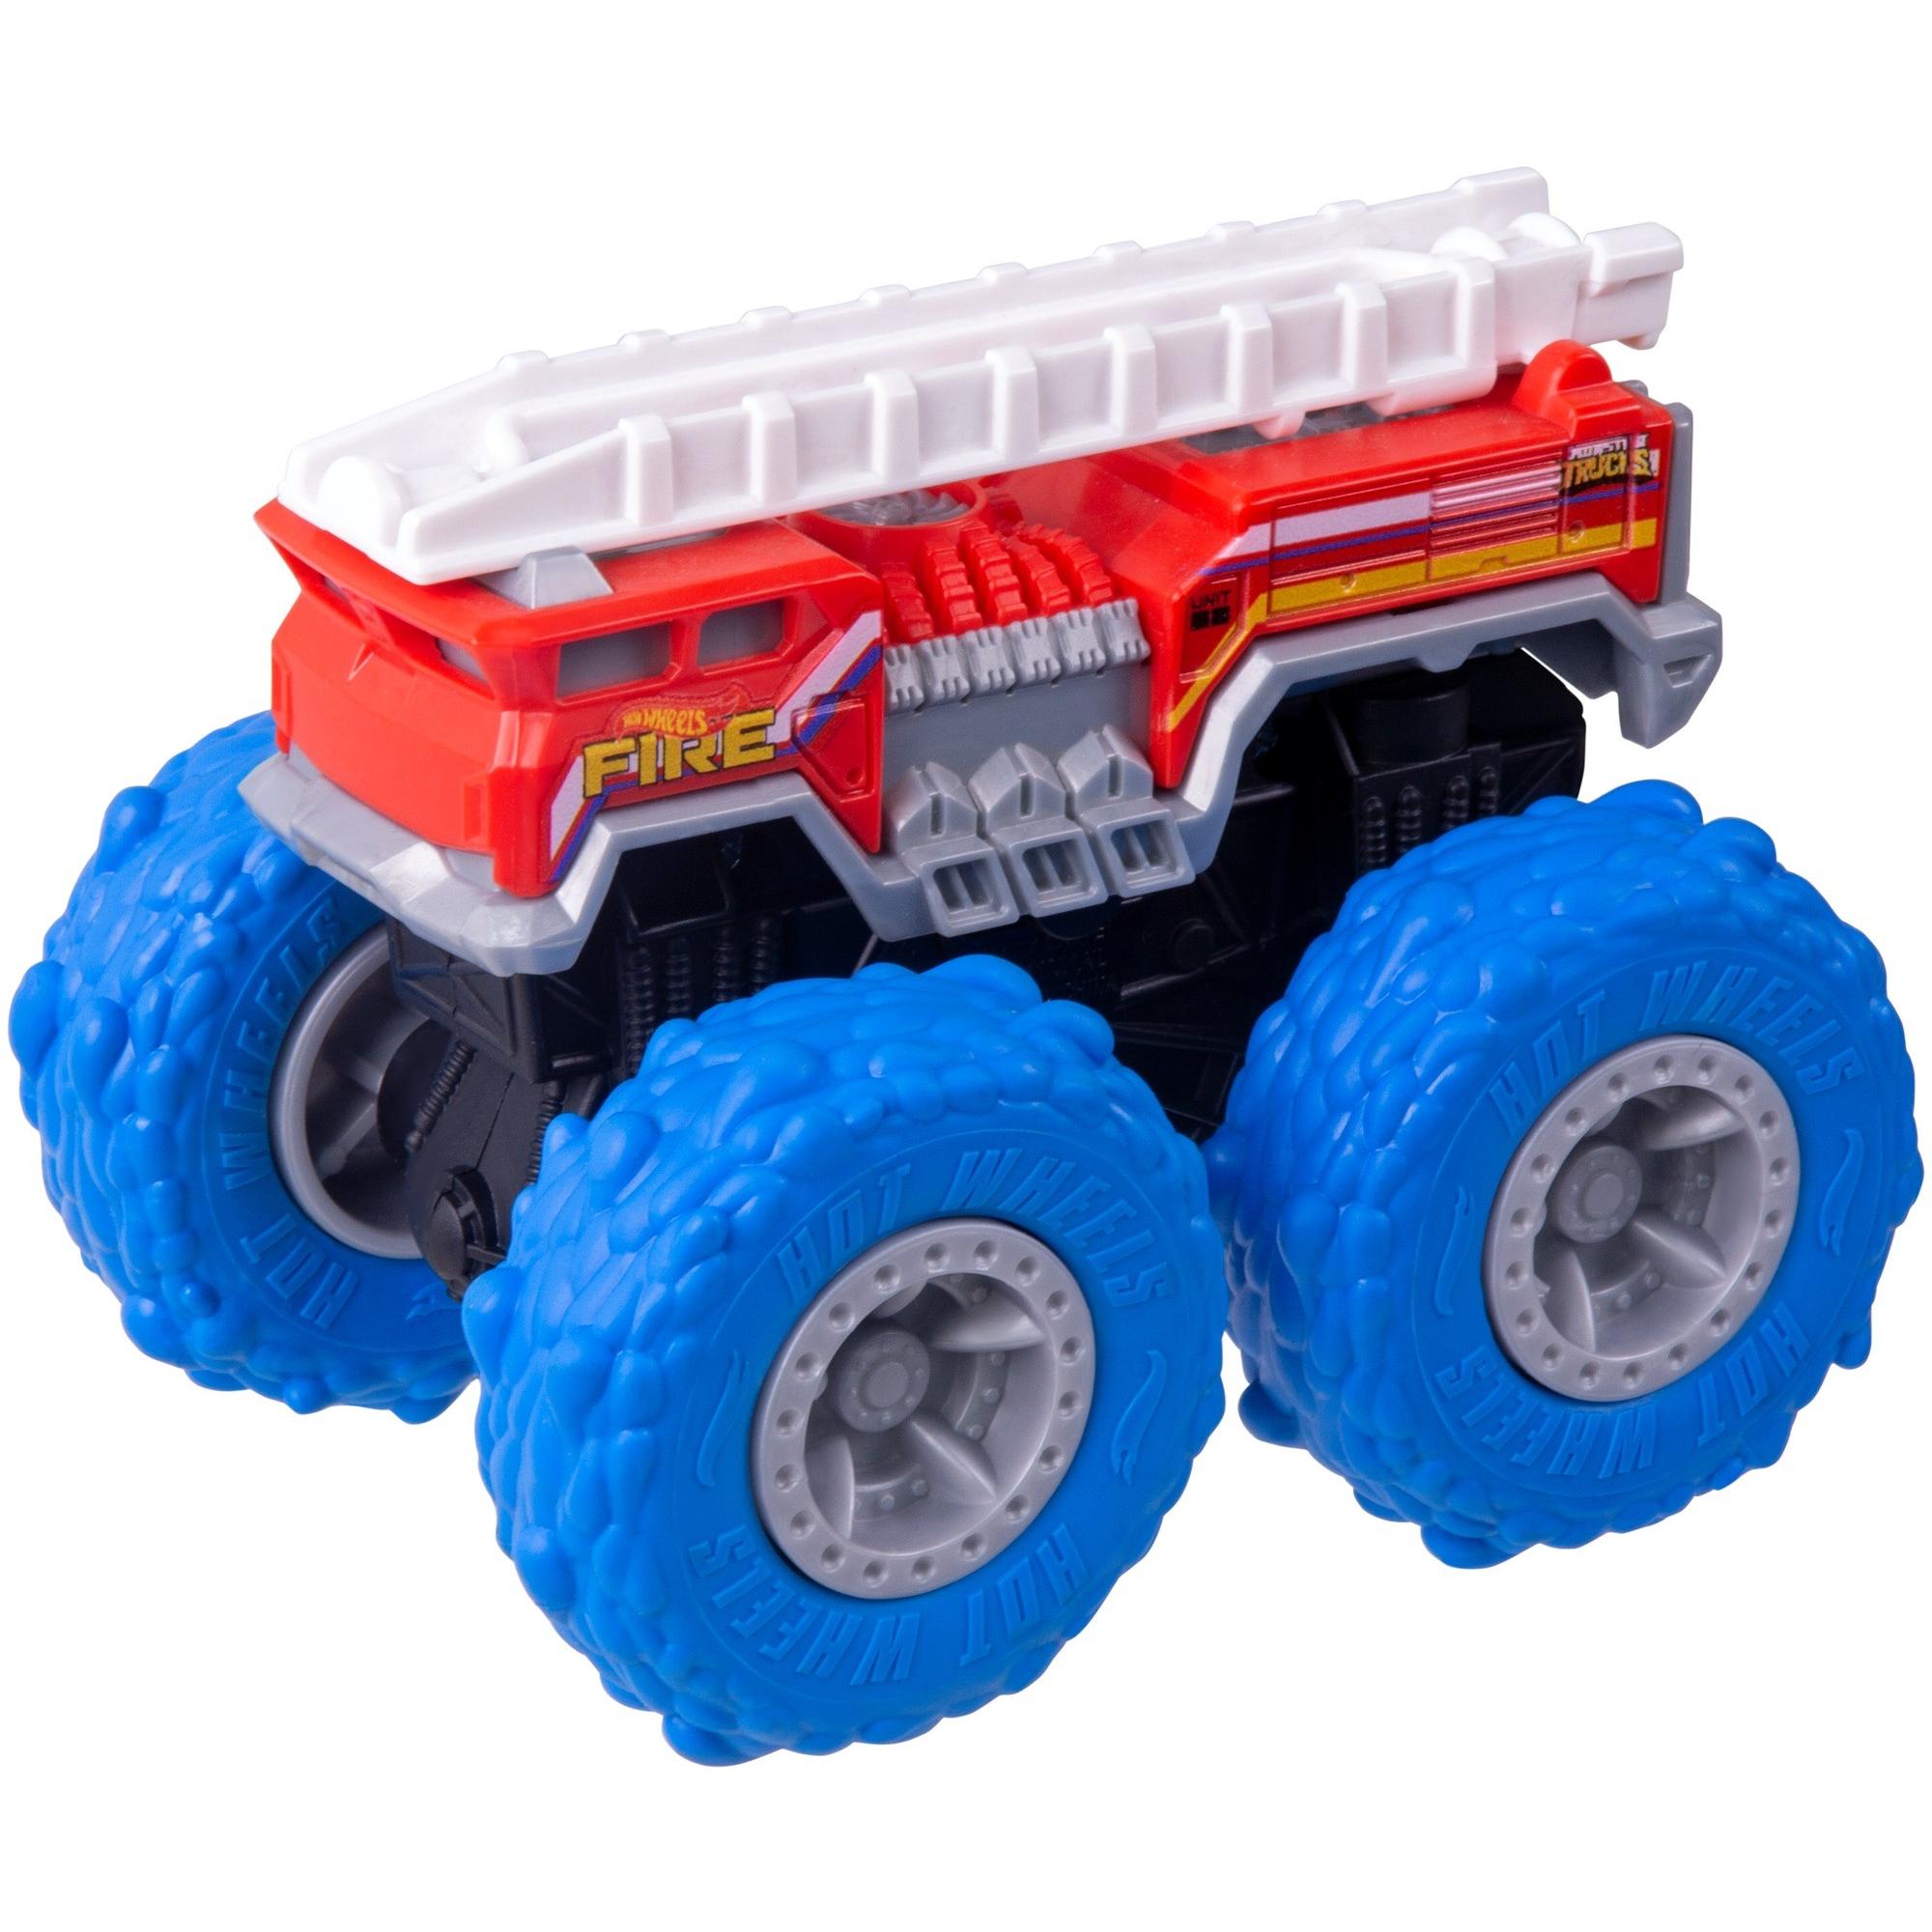 Monster Trucks By Hot Wheels 1:43 Scale Vehicle (Styles May Vary) - image 7 of 9